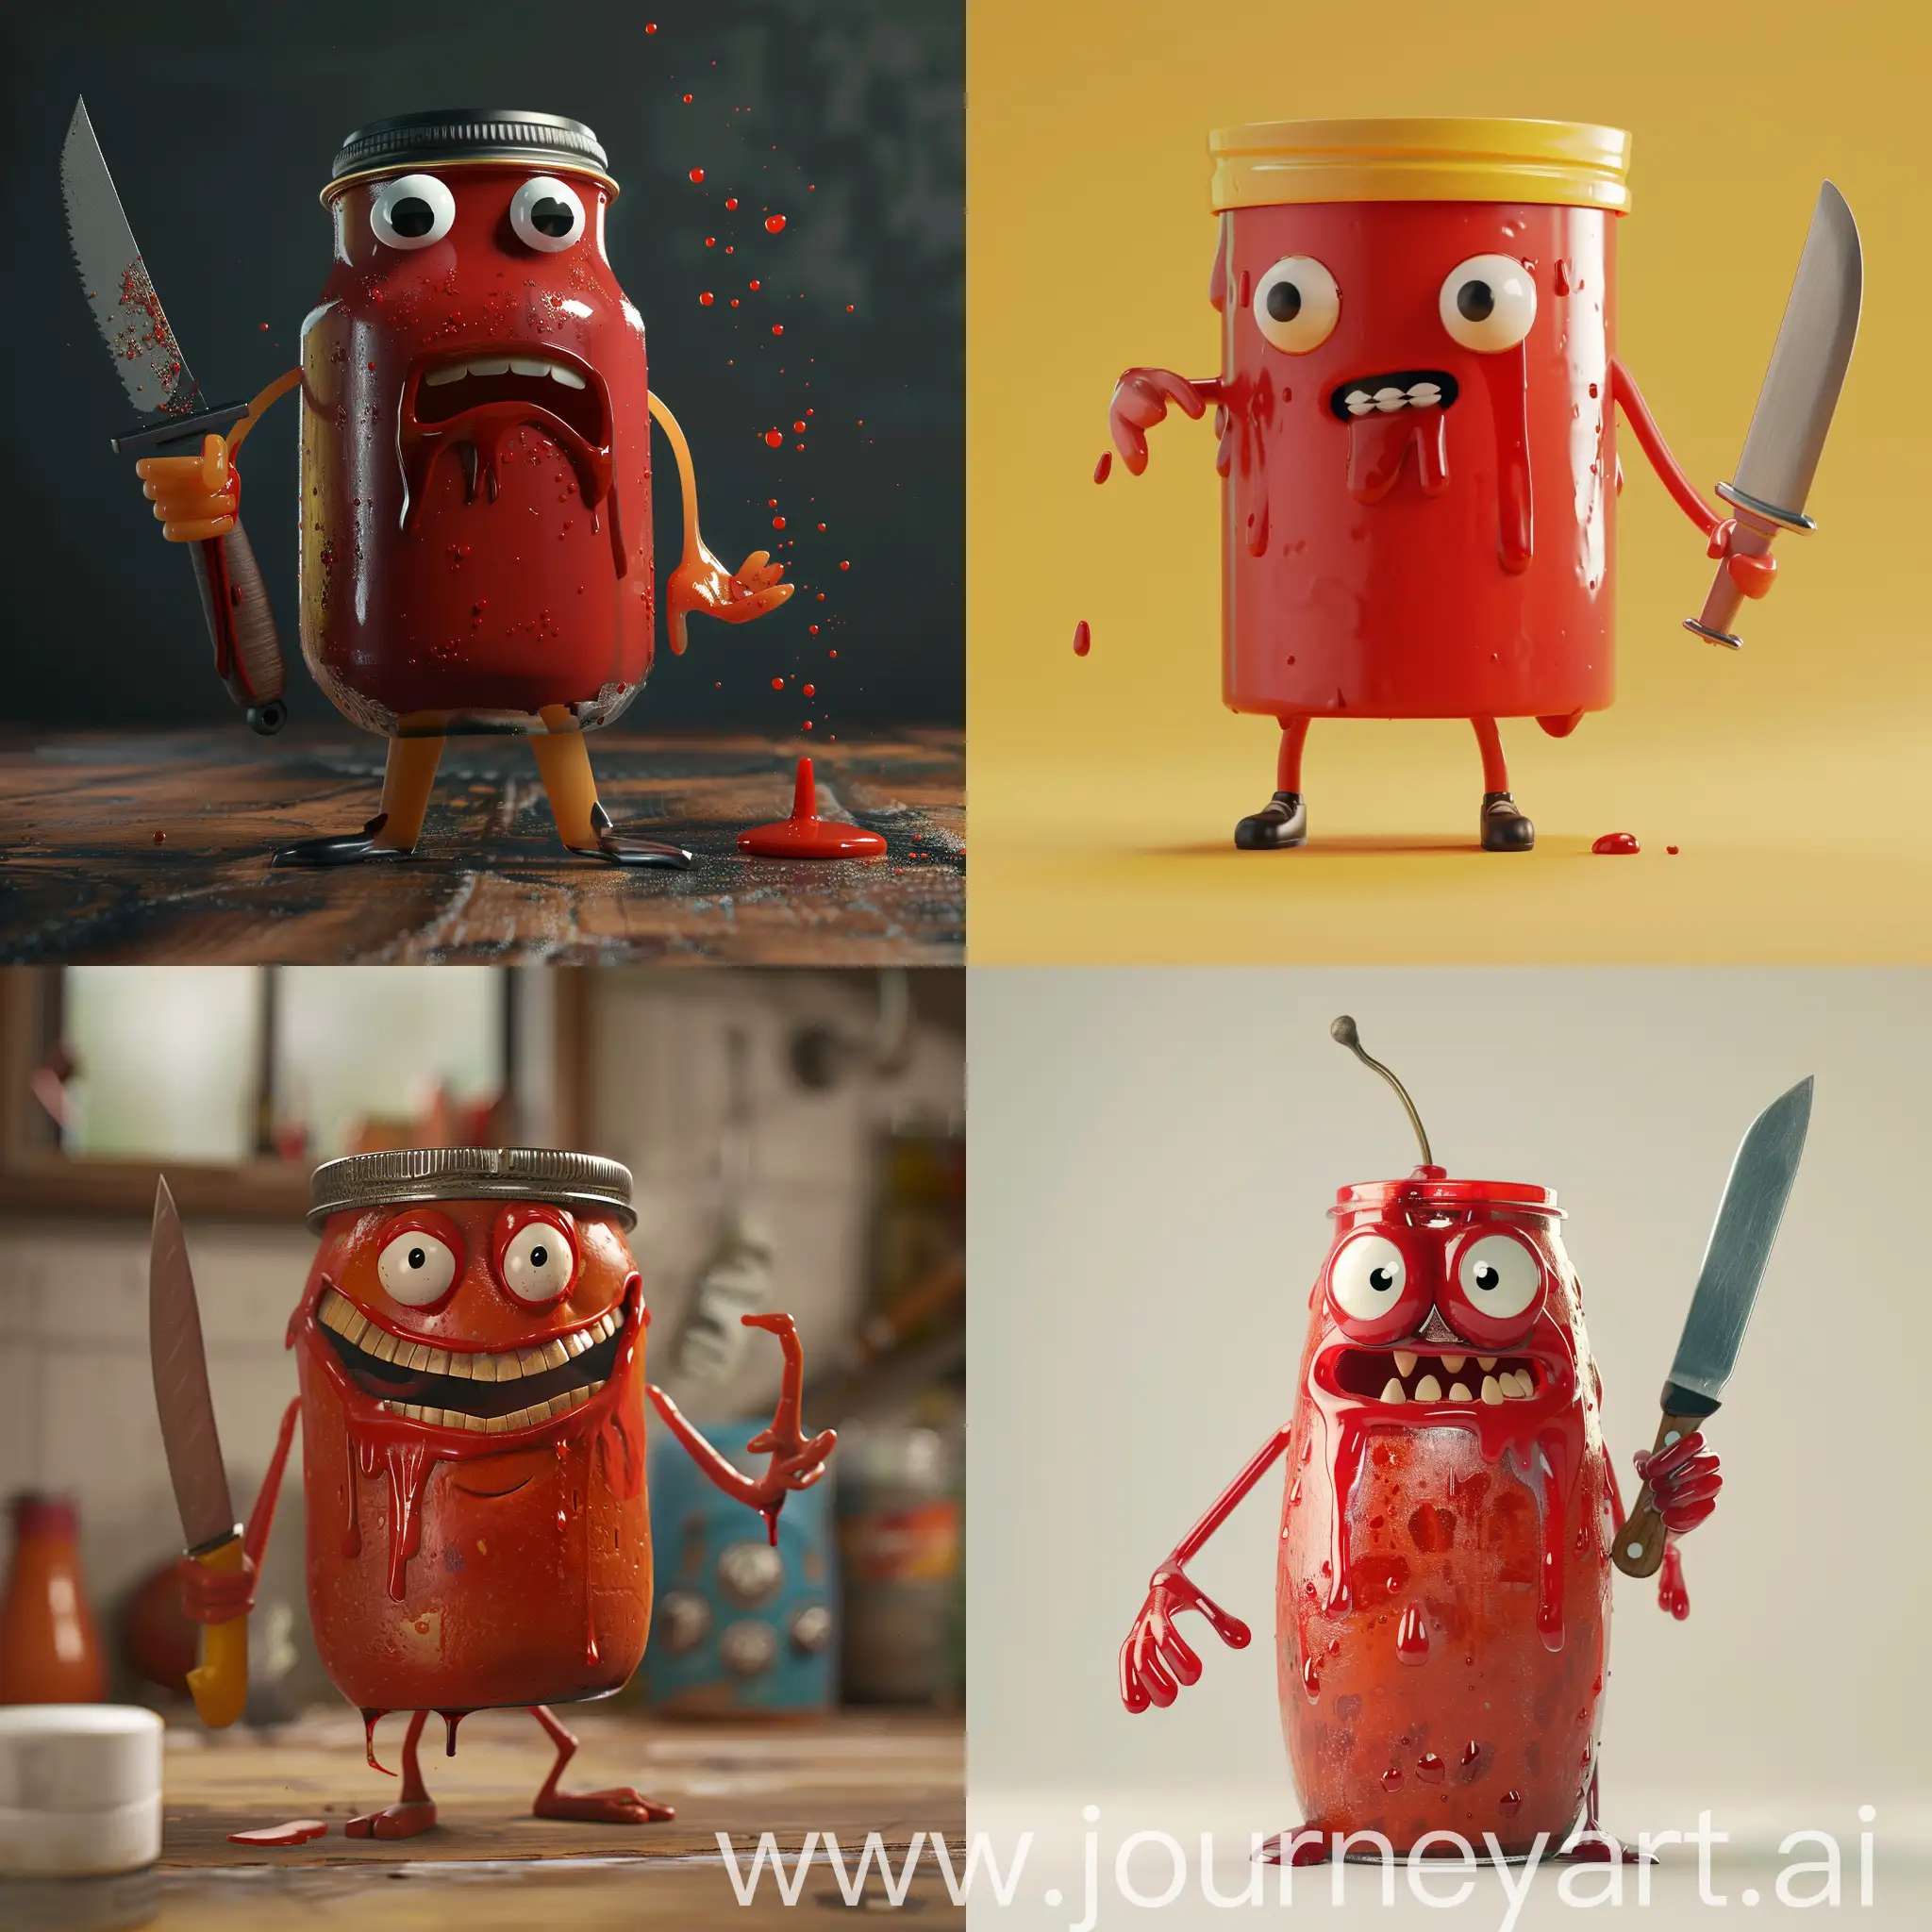 Whimsical-3D-Animation-Animated-Ketchup-Jar-with-Arms-and-Legs-Wielding-a-Playful-Knife